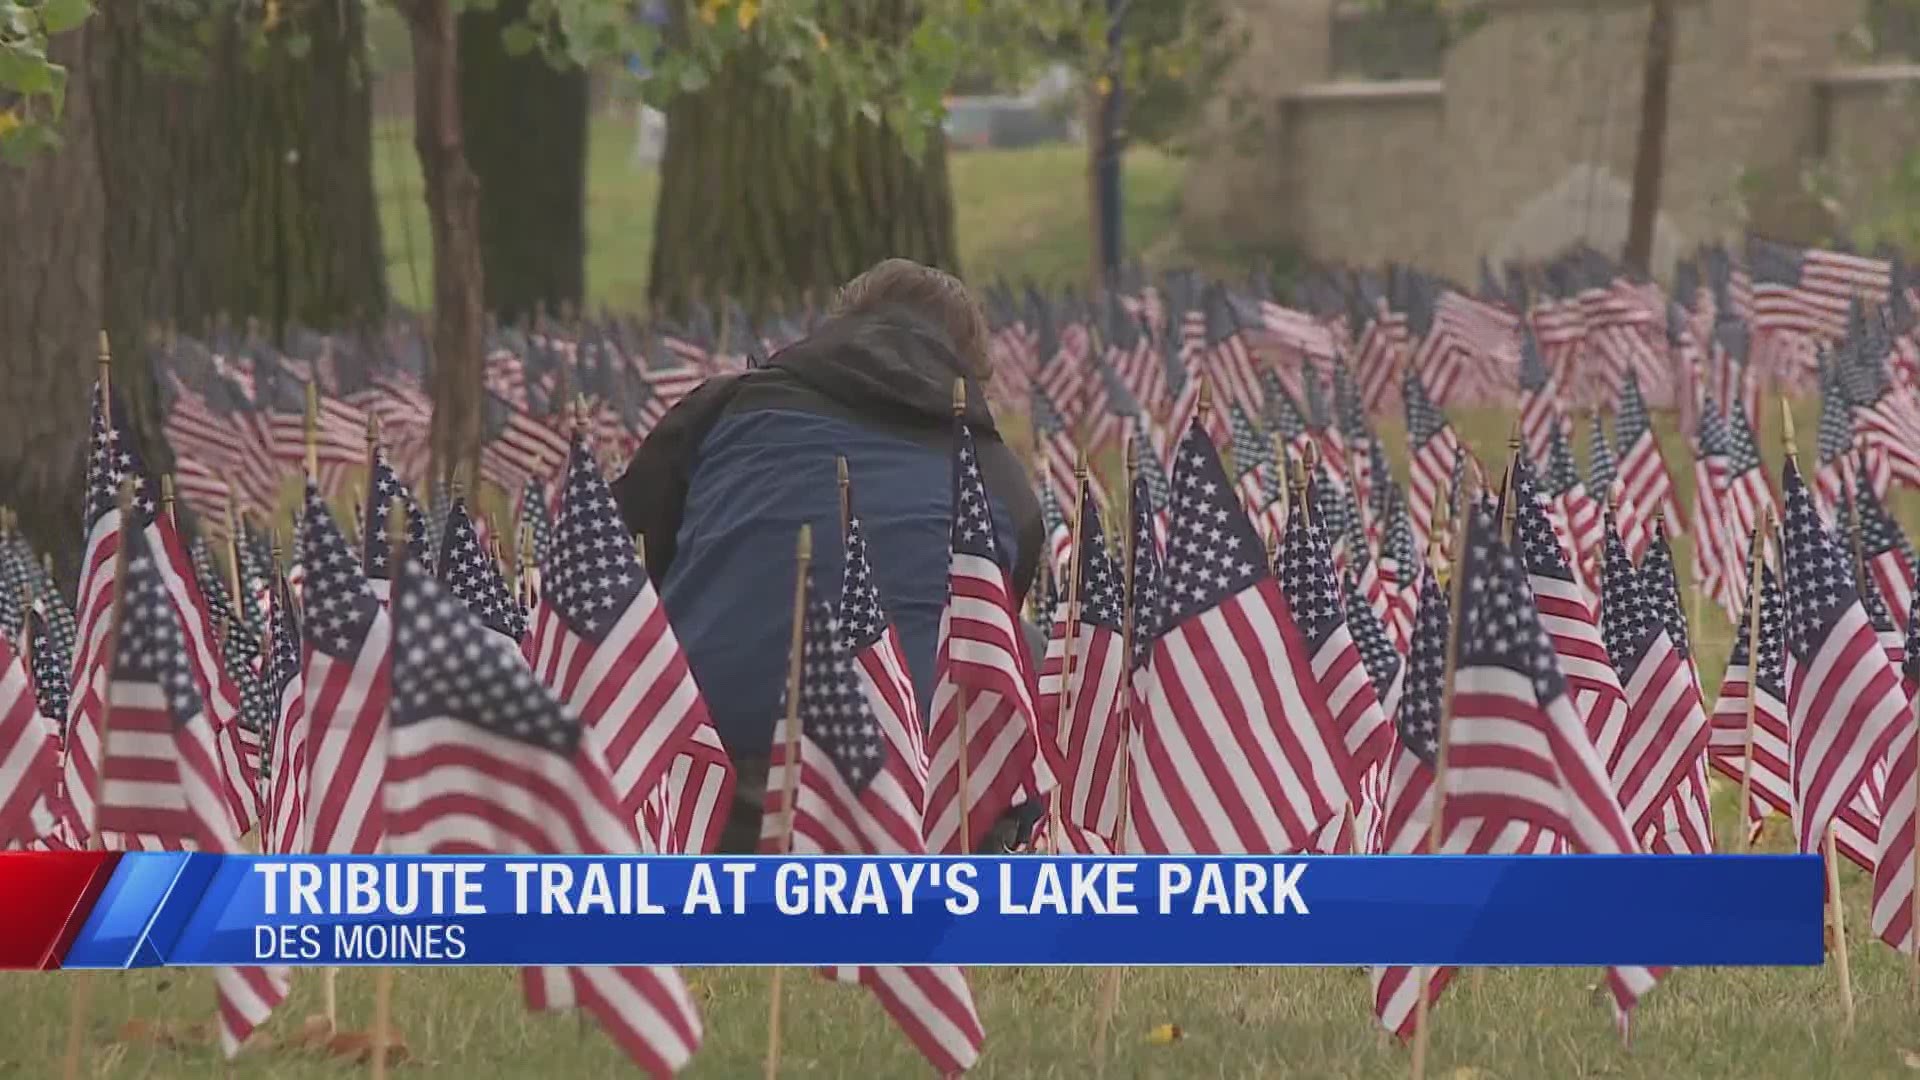 On the 19th anniversary of the 9/11 attacks, Iowans can visit the annual 9/11 Tribute Trail at Gray’s Lake Park through Saturday, Sept. 12.